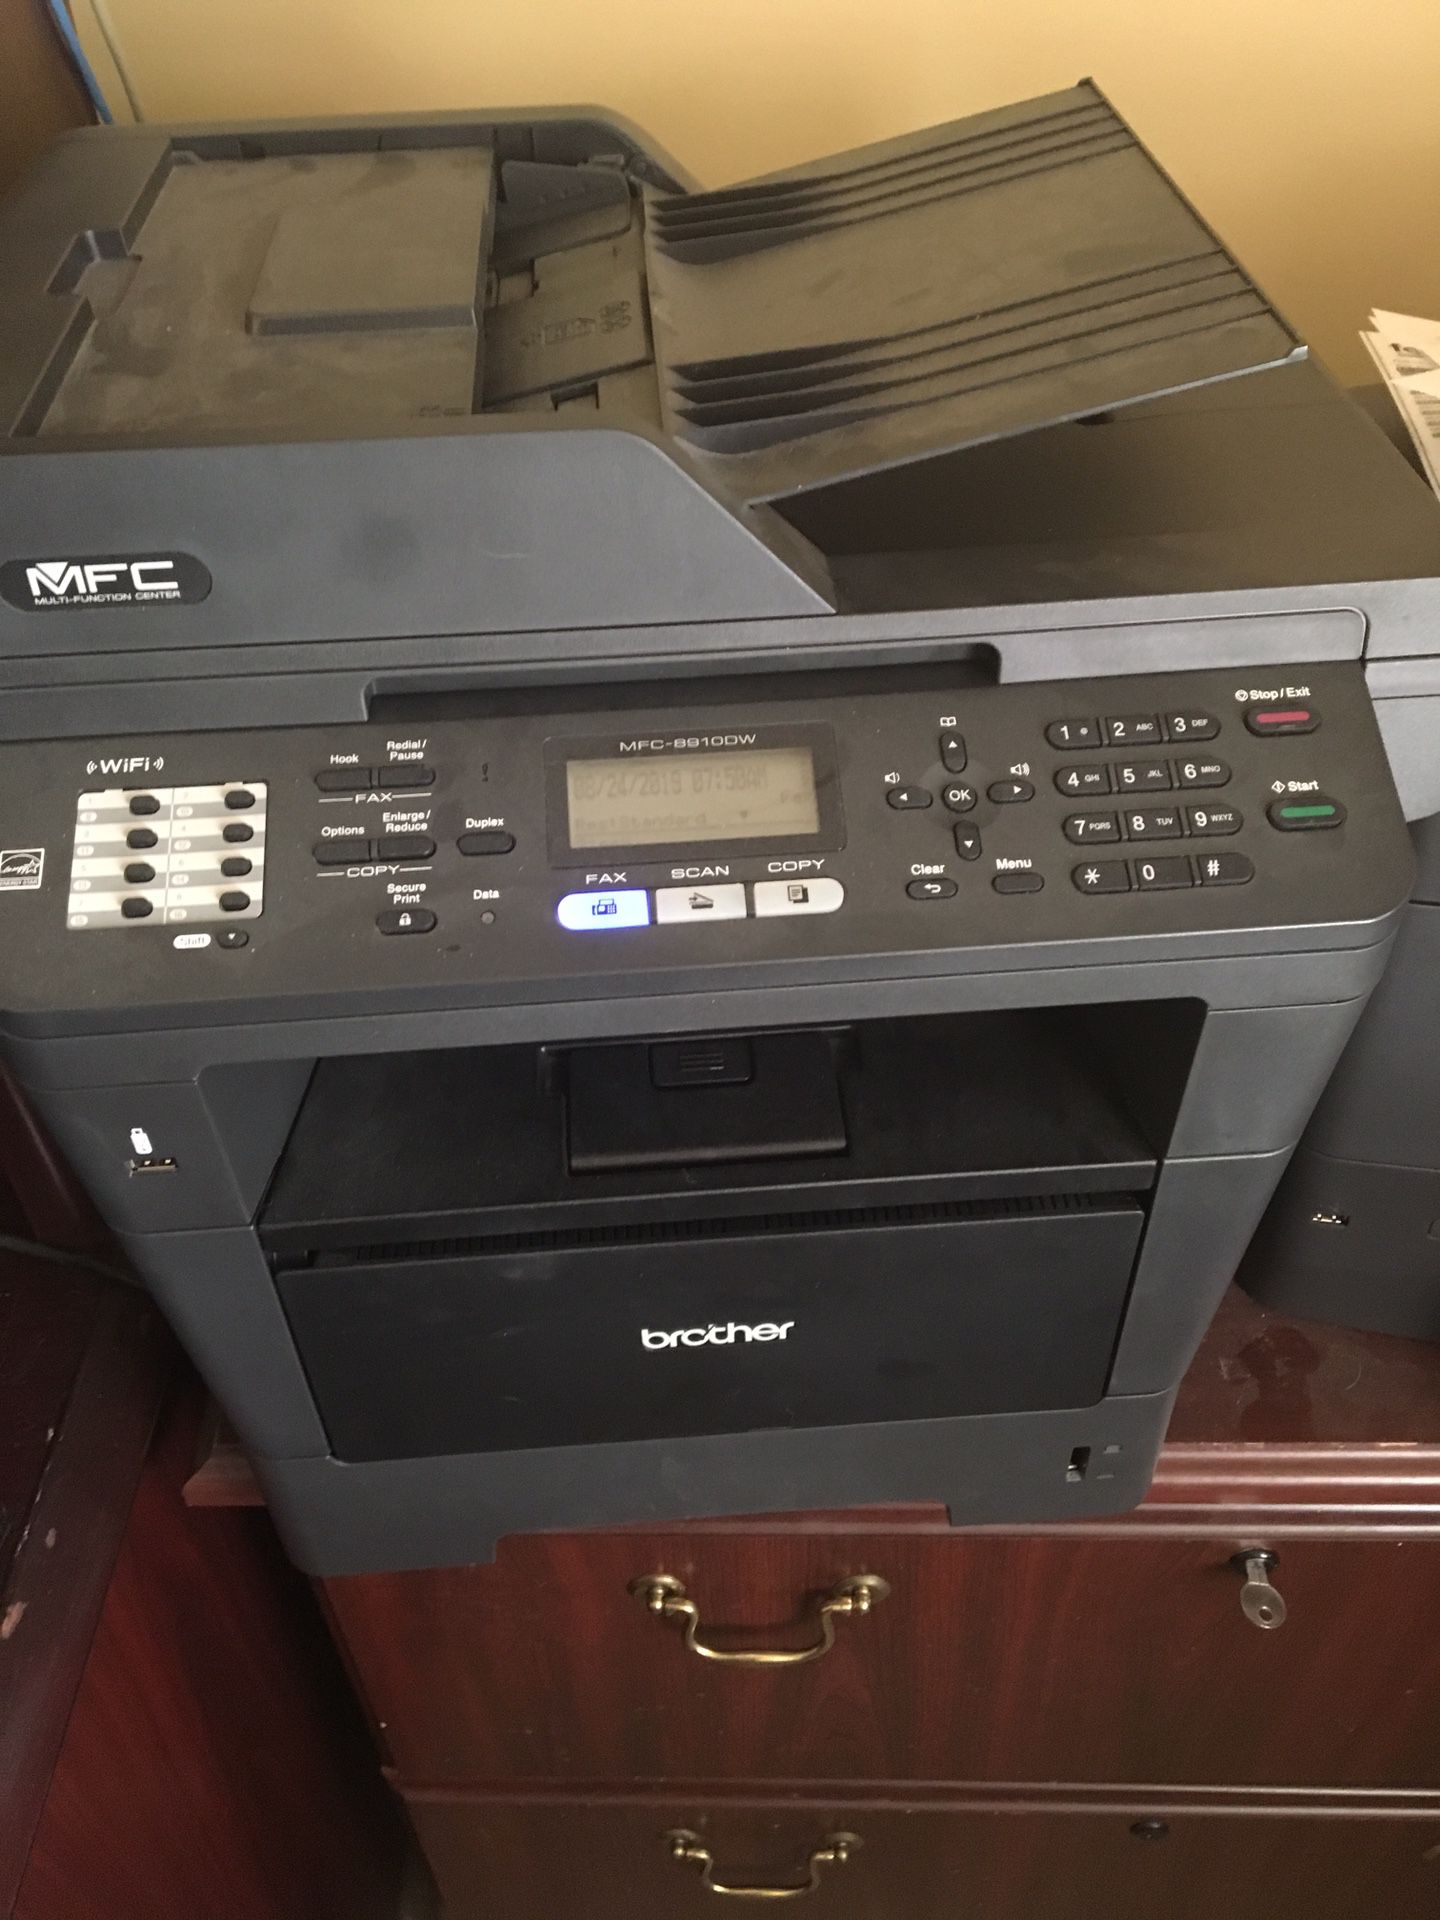 Brother MFC 8910 DW printer / fax / scanner